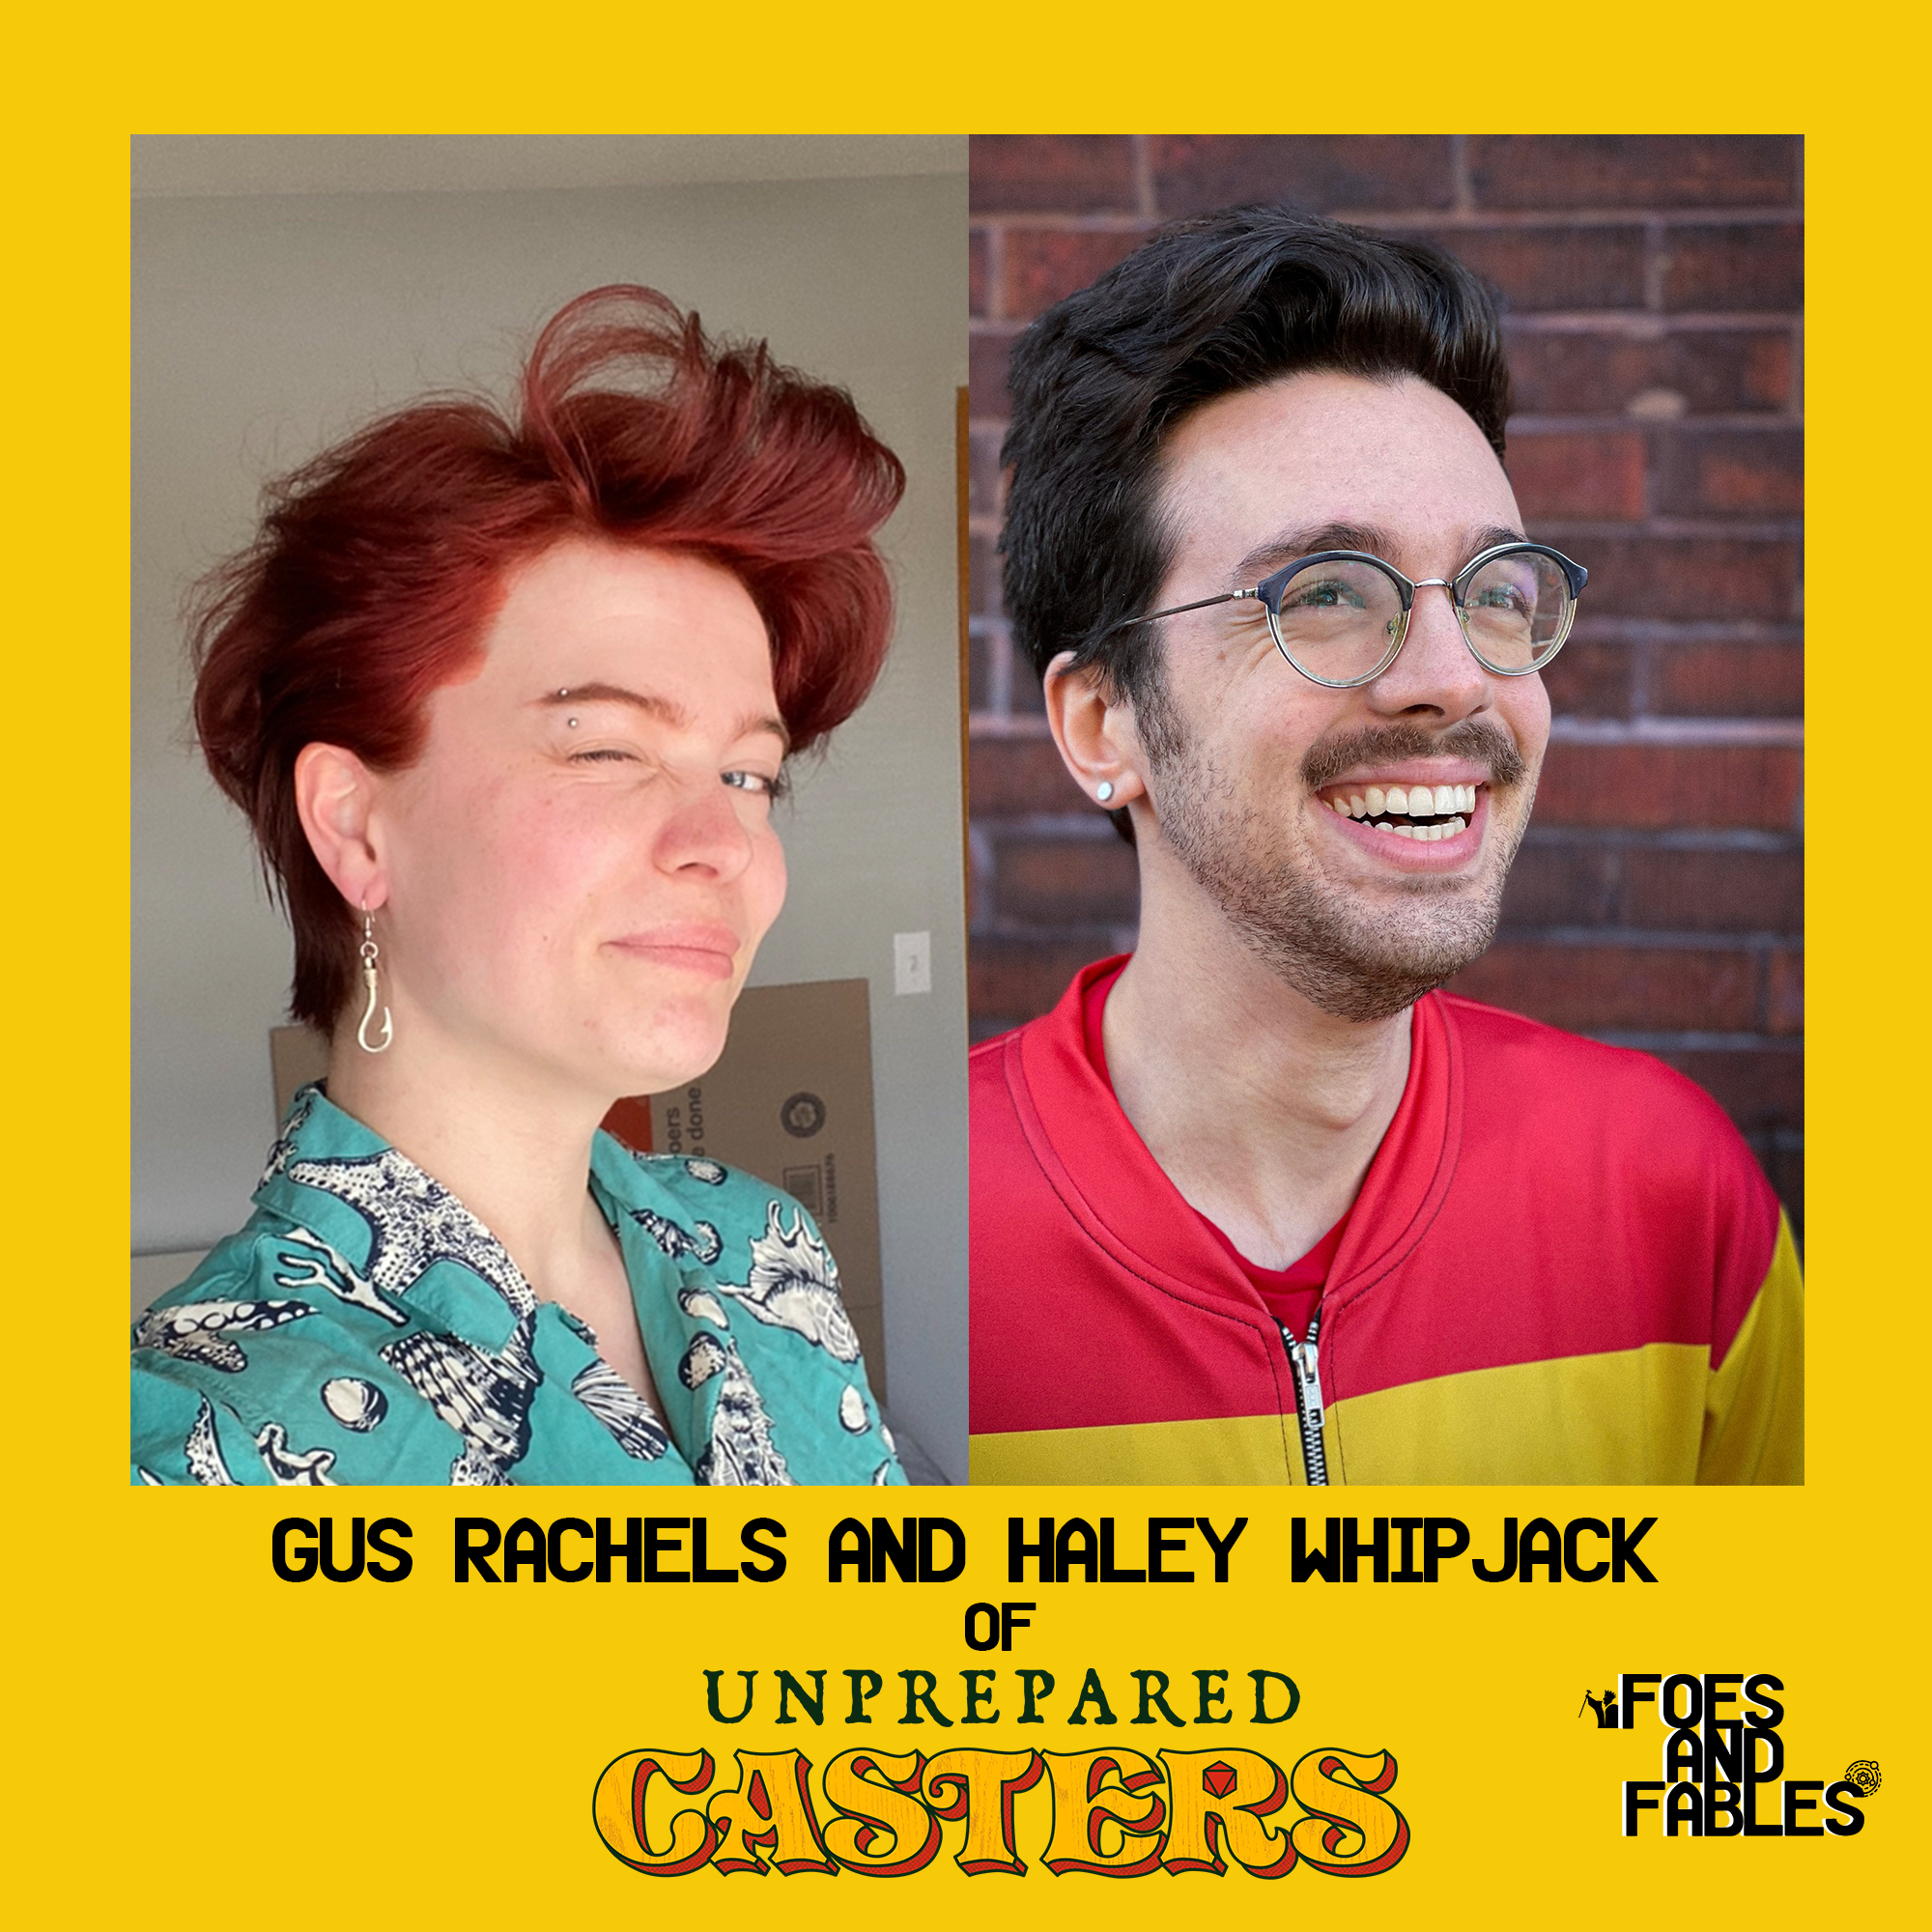 INTERVIEW - Haley Whipjack and Gus Rachels of Unprepared Casters | Friends and Fables